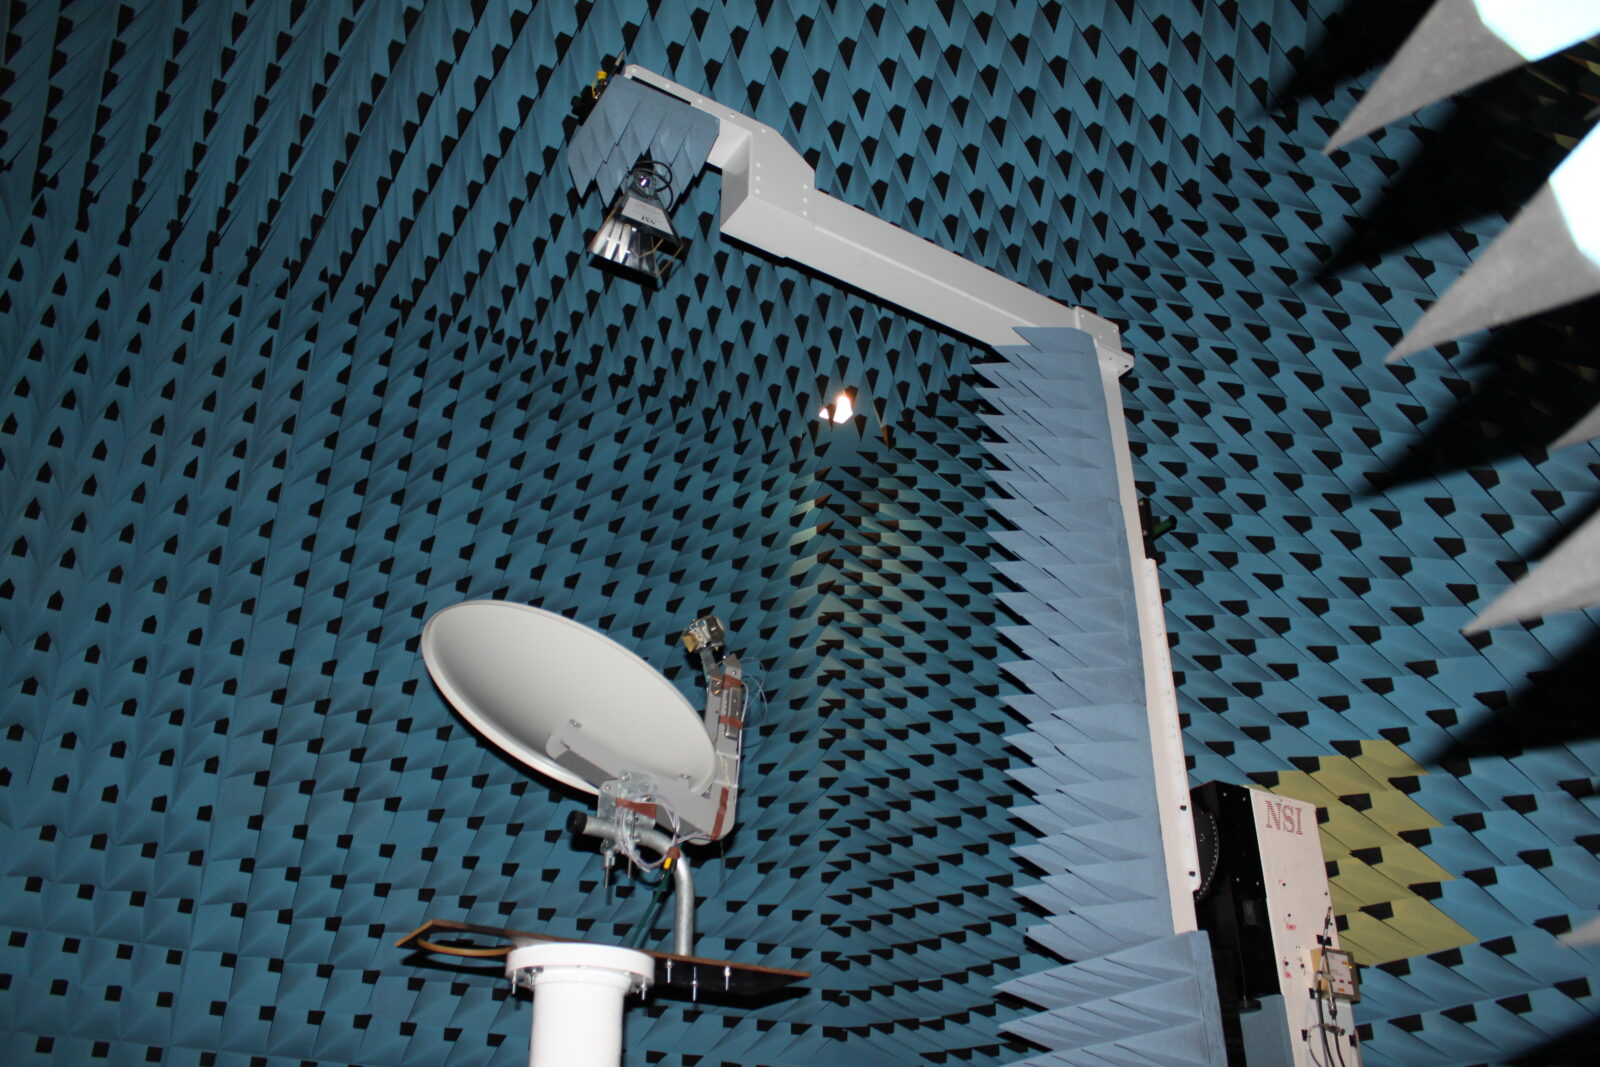 Photo of the measurement of parabolic dish antenna in a shielded anechoic chamber